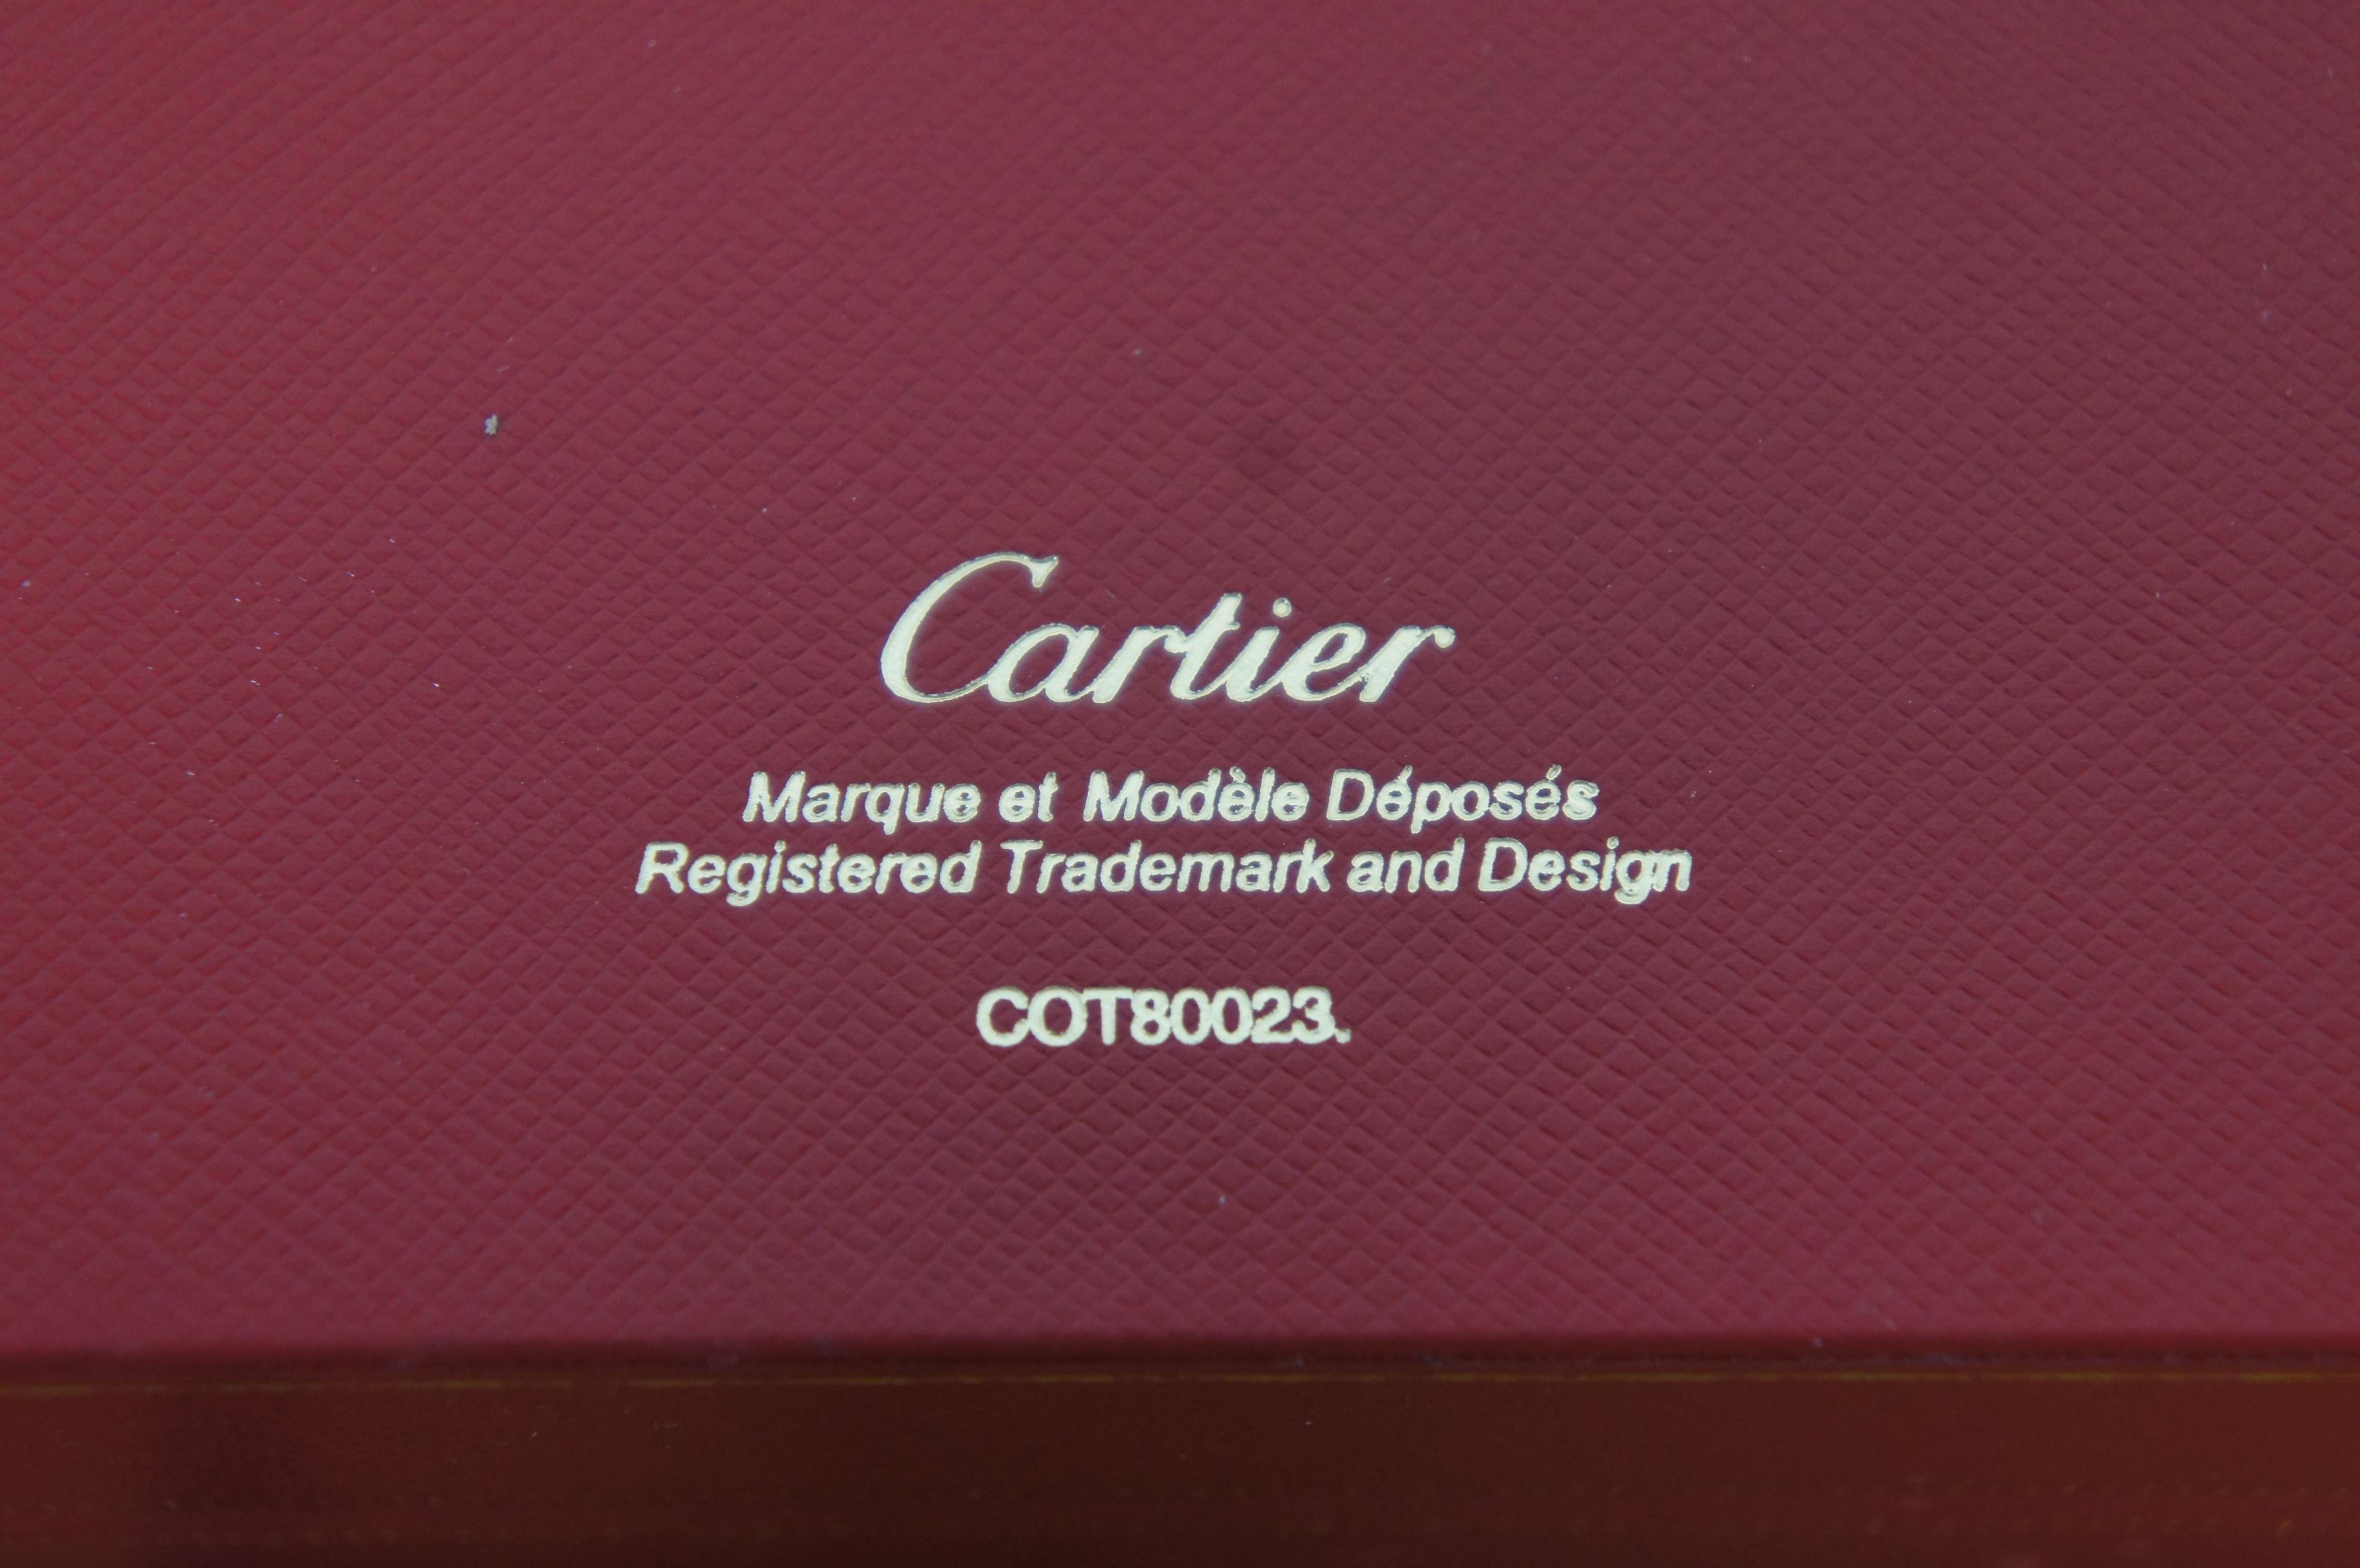 2 Cartier Glasses Sunglasses Case Pair Red Leather Sleeve Embossed Box 6